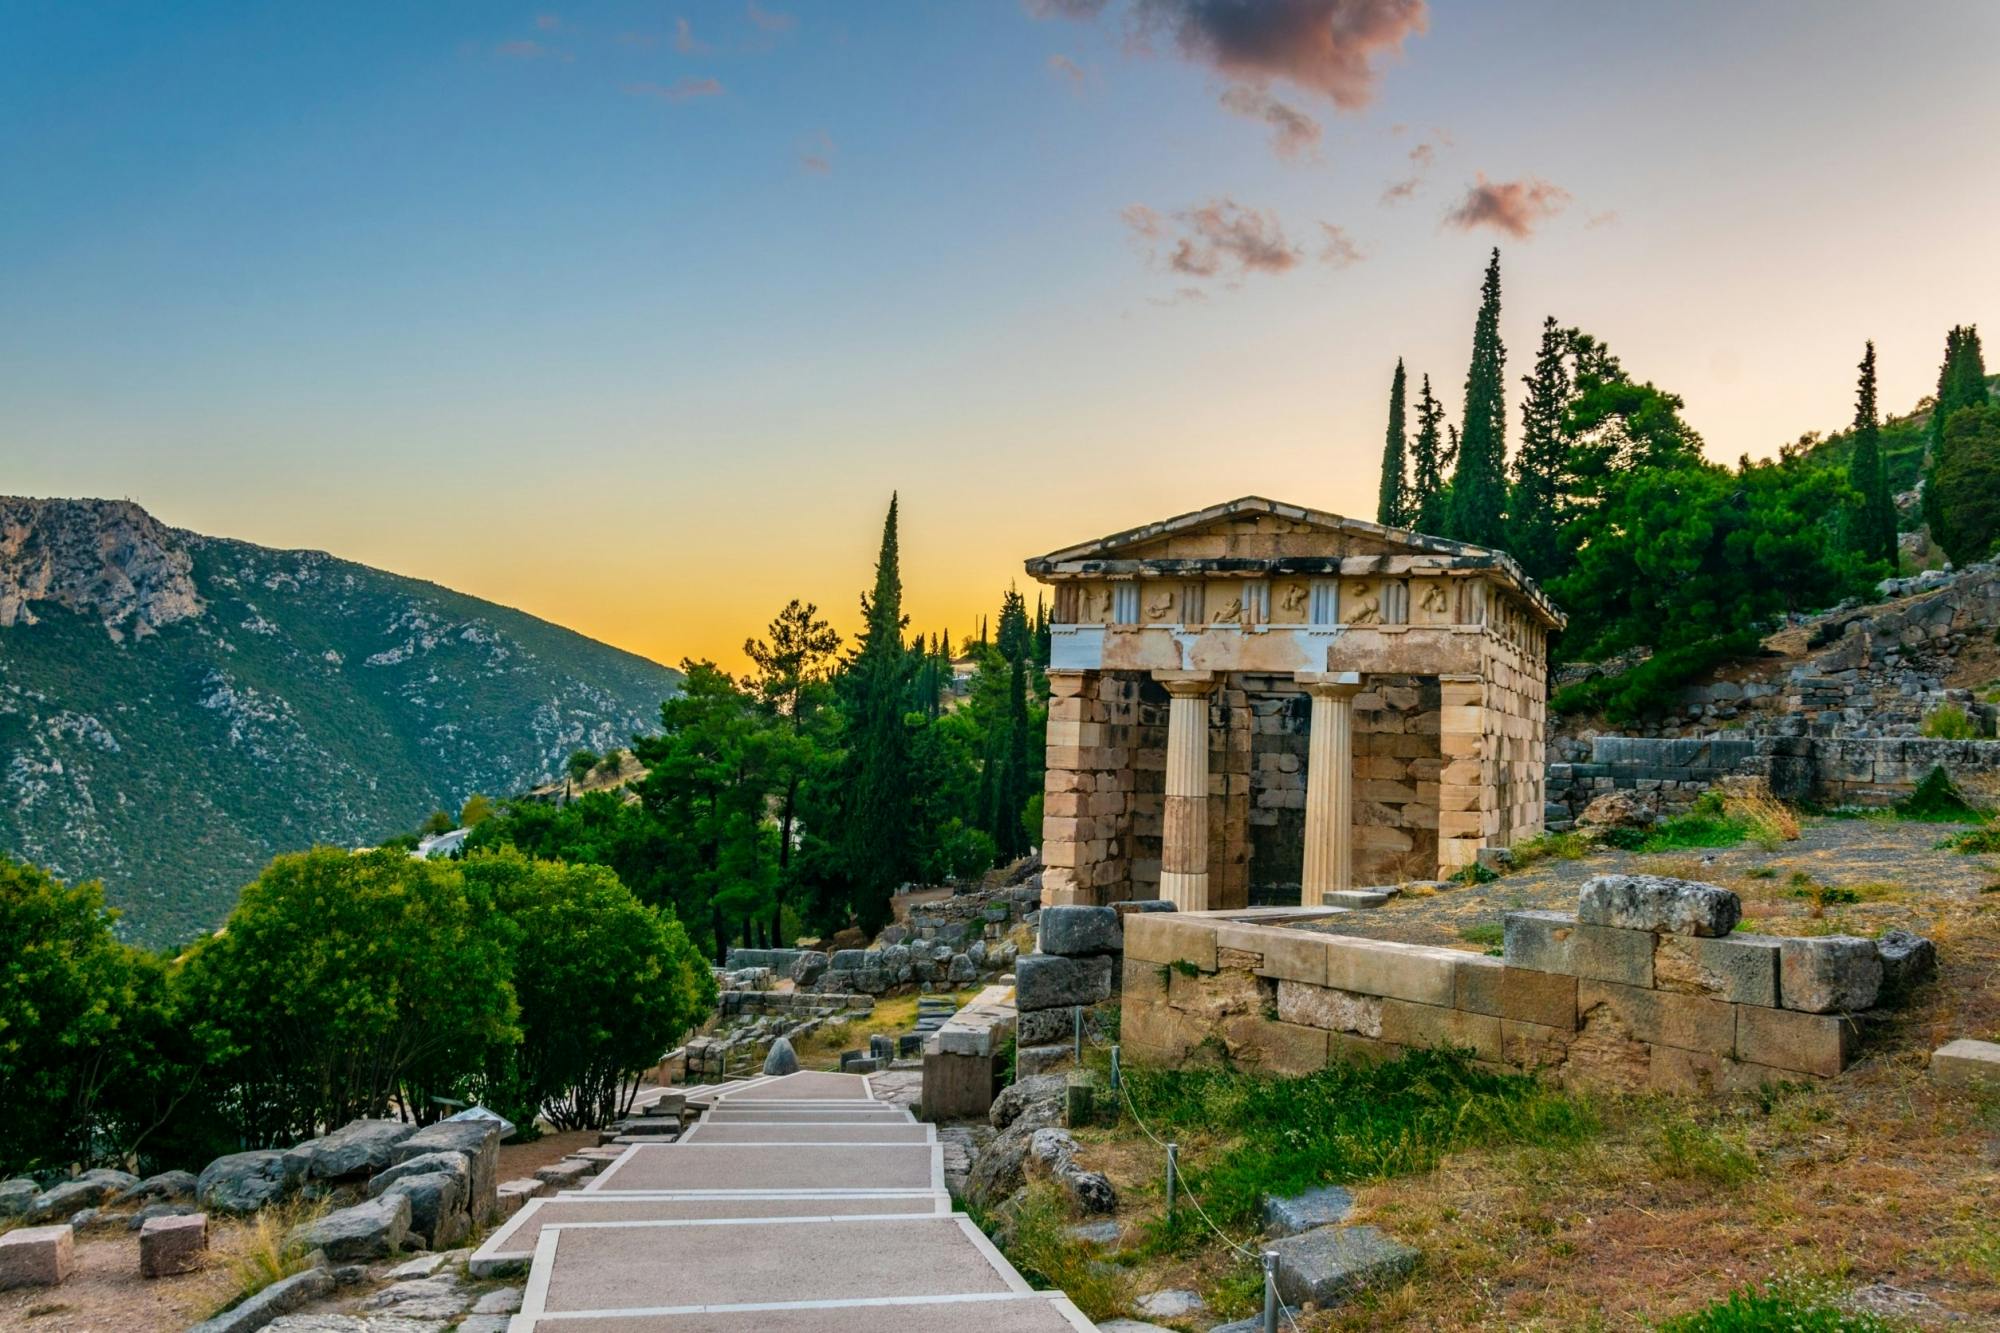 Delphi archaeological museum skip the line ticket and audio tour Musement